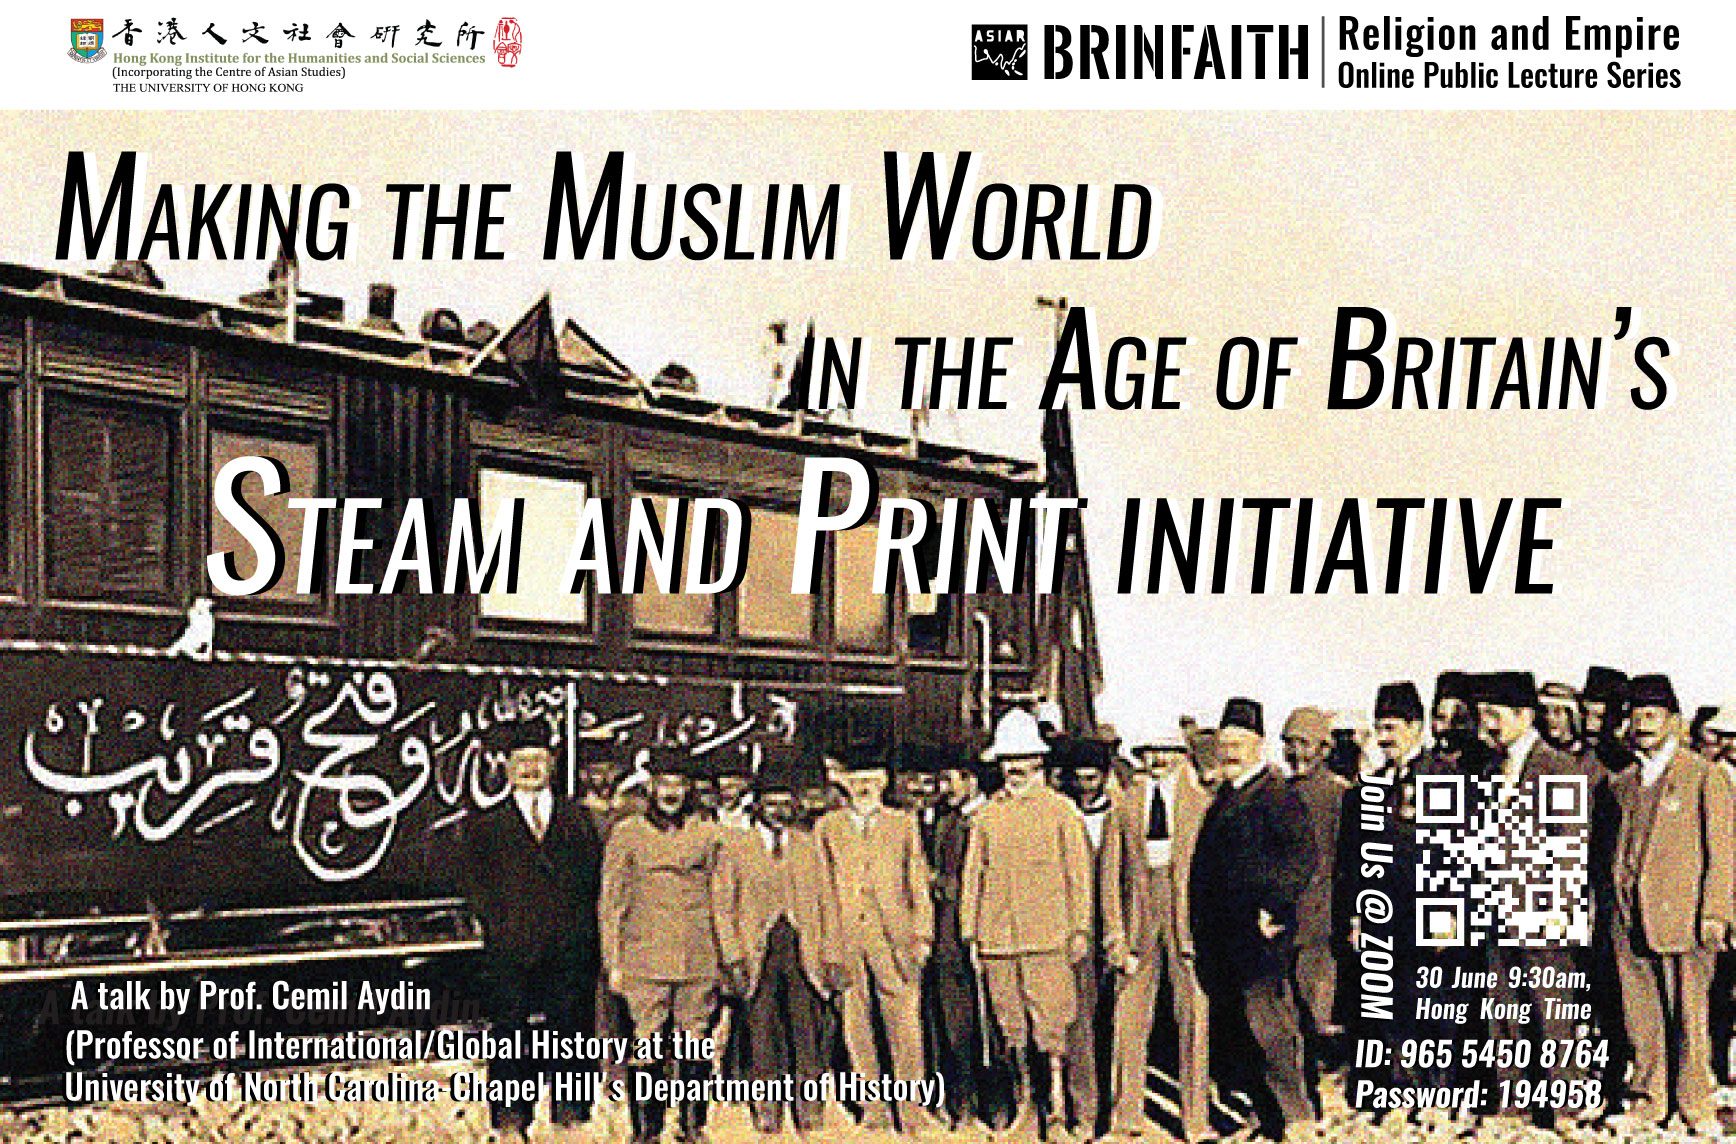 BRINFAITH Religion and Empire Lecture Series on “Making the Muslim World in the Age of Britain’s Steam and Print Initiative” by Professor Cemil Aydin (June 30, 2021)